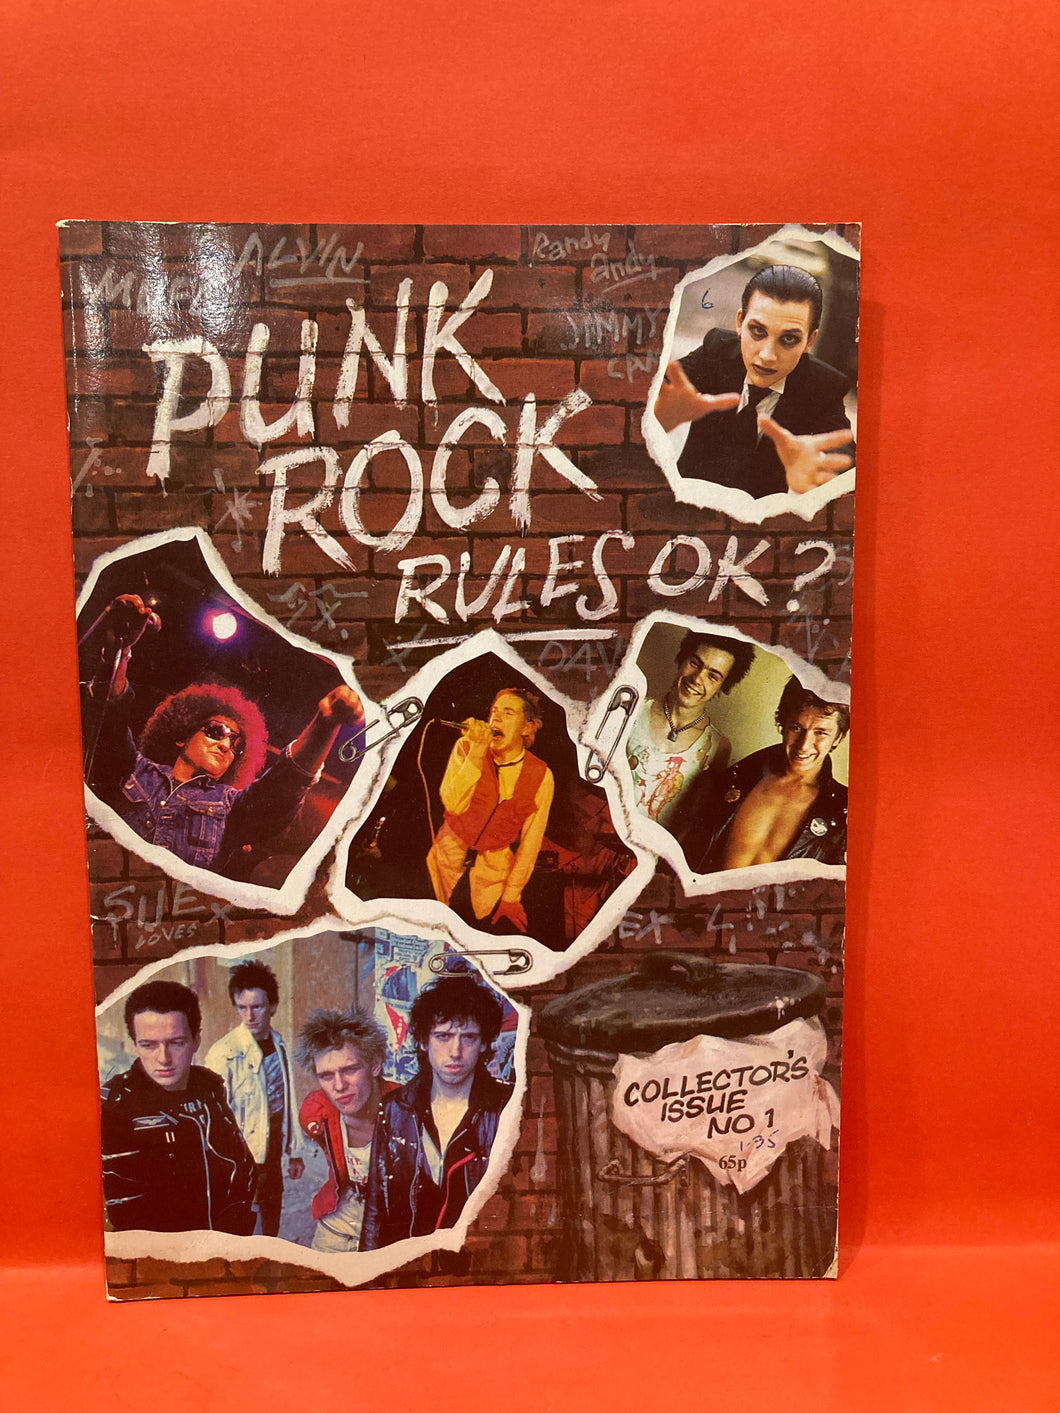 PUNK ROCK RULES OK? – Collectors Issue No.1 - Paperback Book -  RARE 1st ed. 1977